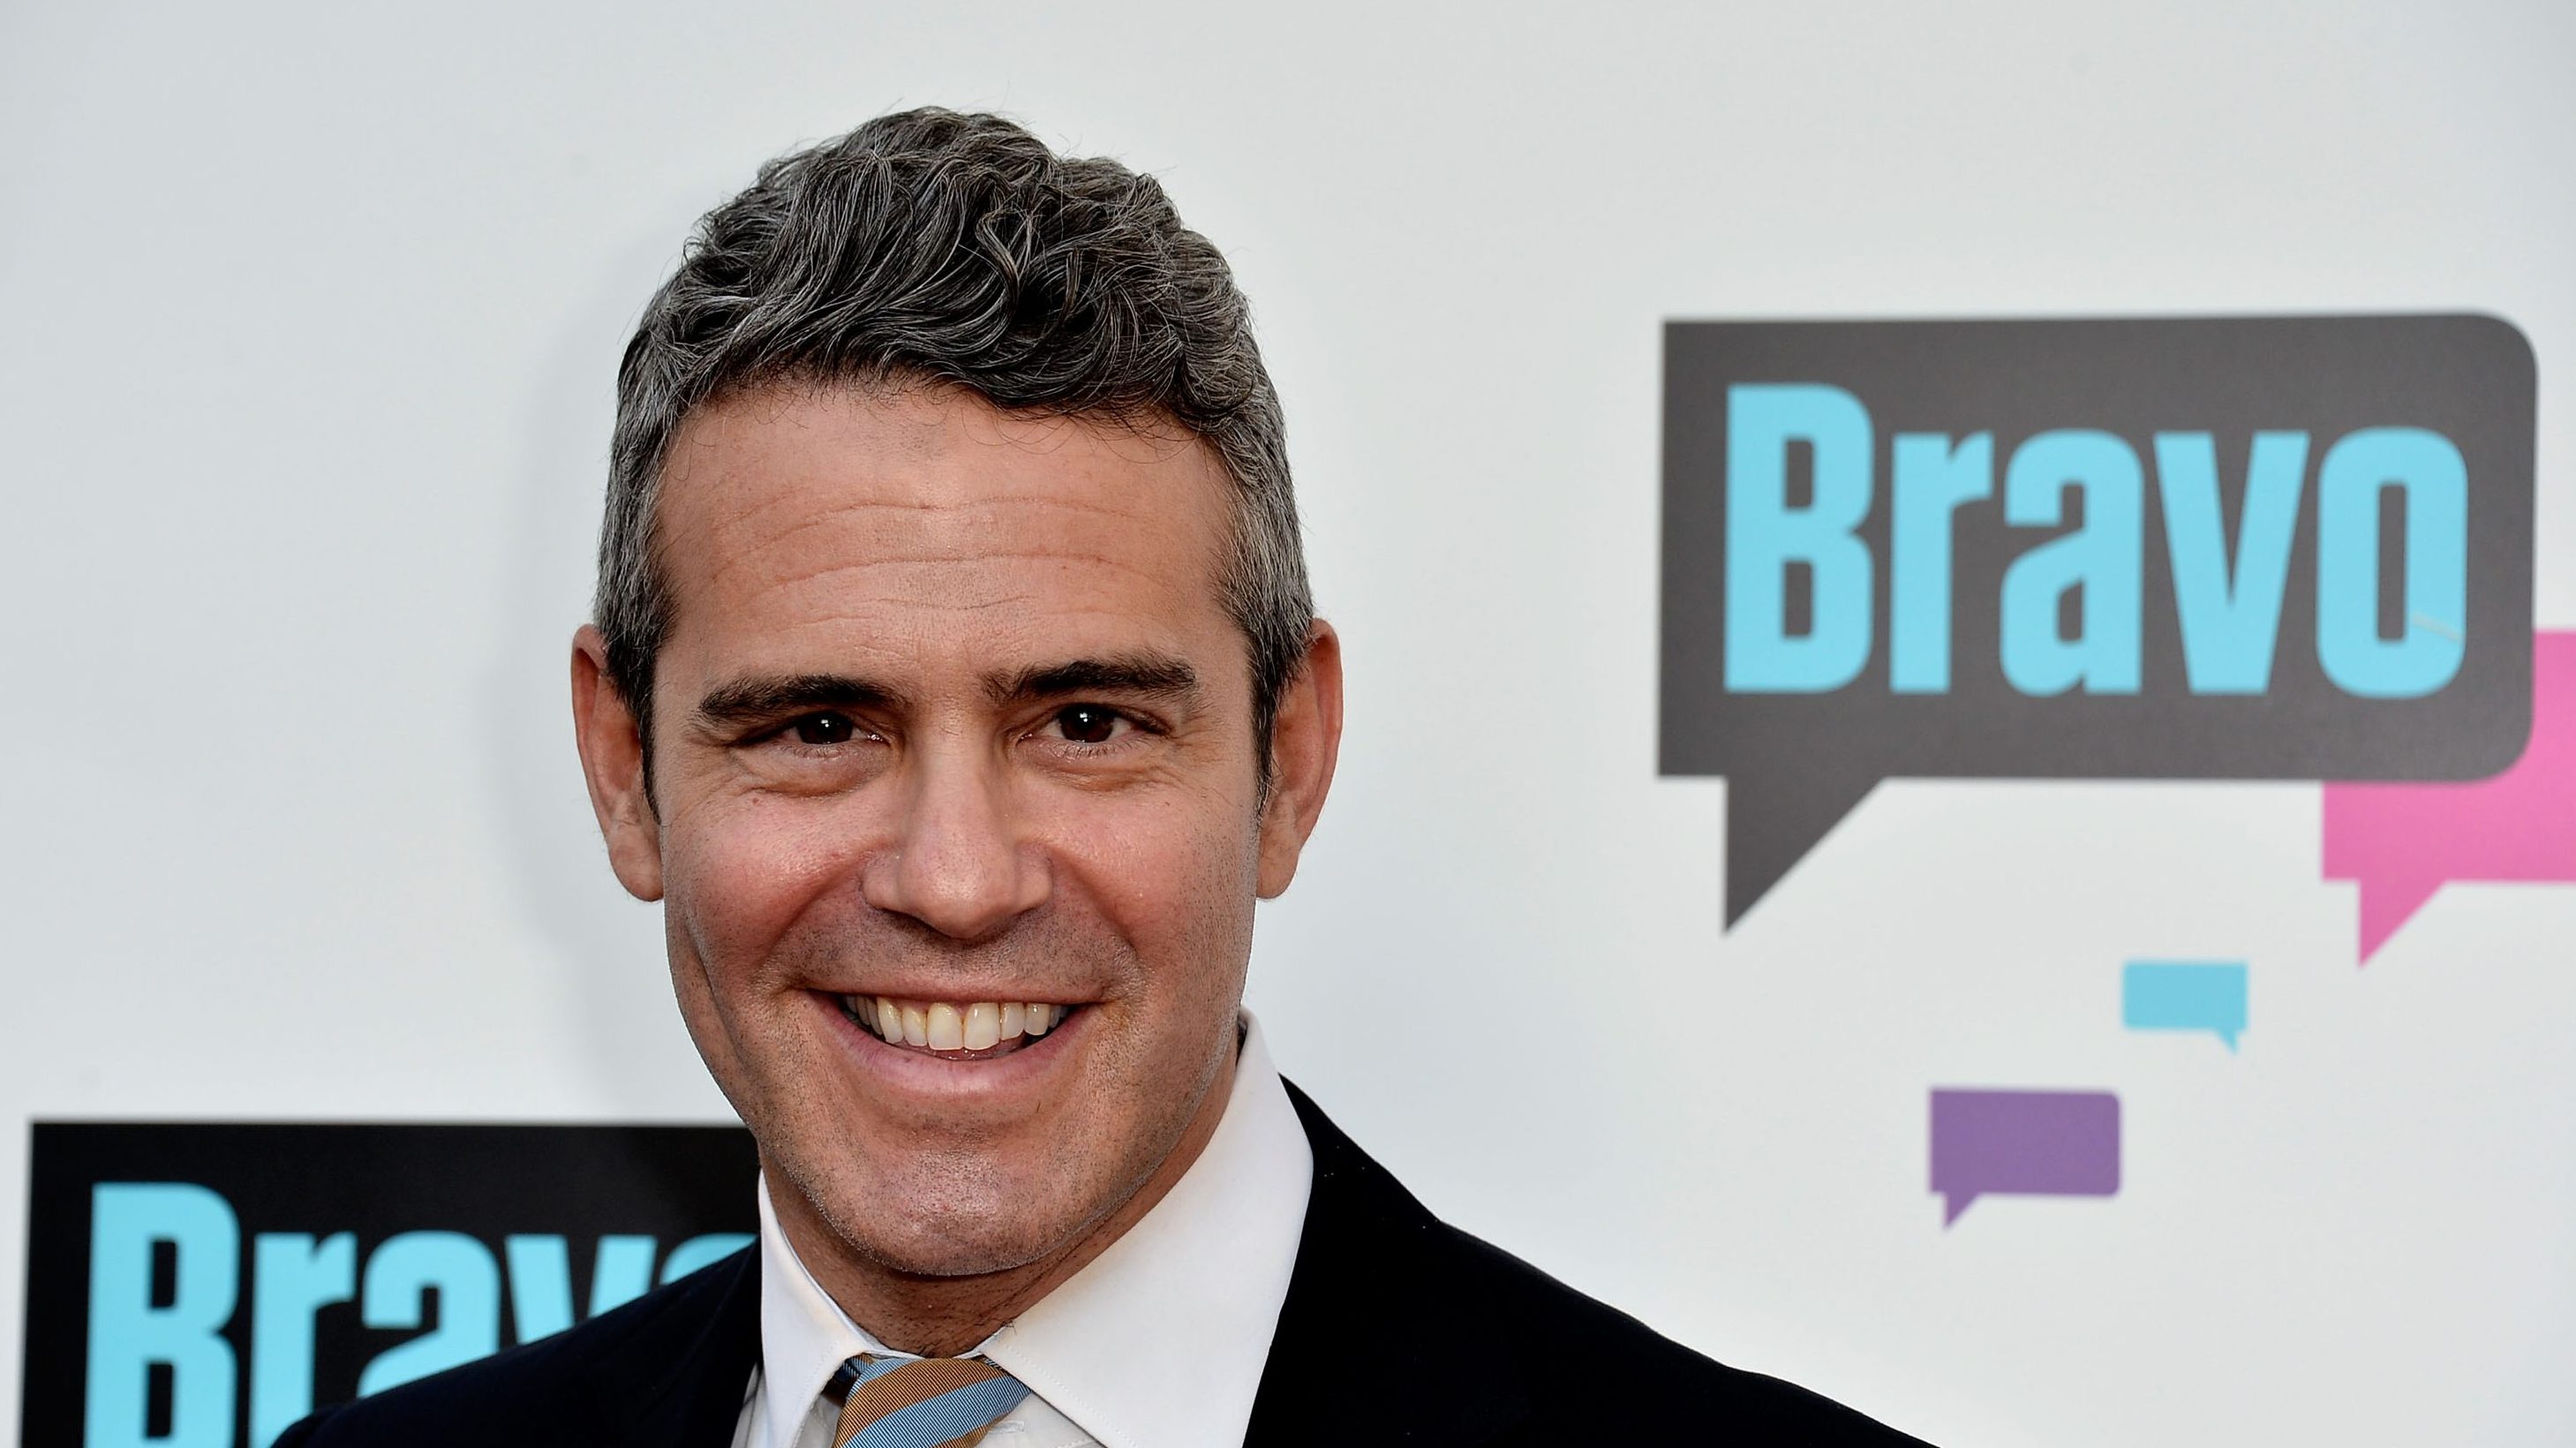 handsome andy cohen net worth